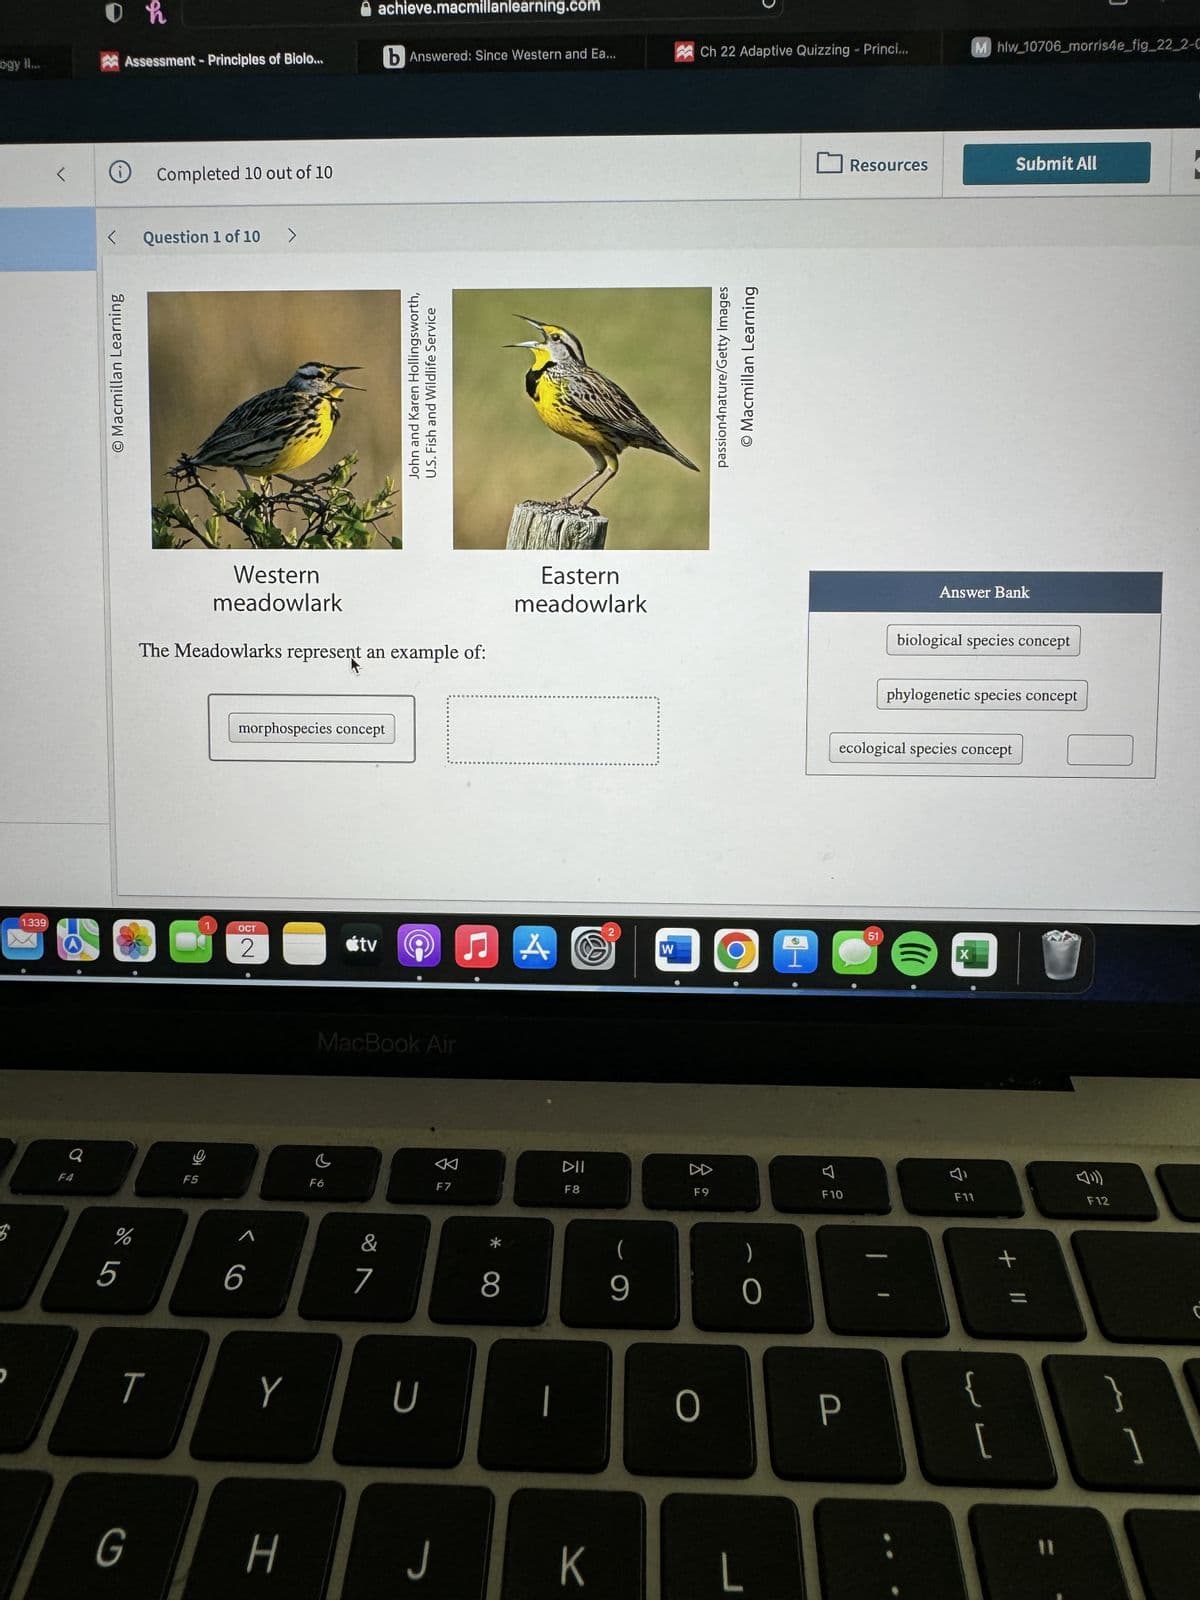 1.339
<
Q
F4
0 h
<
Assessment - Principles of Biolo...
O Macmillan Learning
5
%
Completed 10 out of 10
Question 1 of 10
G
T
C
F5
1
Western
meadowlark
The Meadowlarks represent an example of:
7
6
OCT
2
>
morphospecies concept
^
Y
H
c
achieve.macmillanlearning.com
tv
F6
MacBook Air
b Answered: Since Western and Ea...
&
7
John and Karen Hollingsworth,
U.S. Fish and Wildlife Service
U
F7
J
*
24
JA
8
Eastern
meadowlark
|
DII
F8
K
2
(
9
W
Ch 22 Adaptive Quizzing - Princi...
F9
O
passion4nature/Getty Images
O Macmillan Learning
0
L
7
F10
Resources
P
51
ecological species concept
biological species concept
(((
F
Mhlw_10706_morris4e_fig_22_2-C
Answer Bank
phylogenetic species concept
X
D
F11
Submit All
لا
+ 11
F12
L
L
\
1